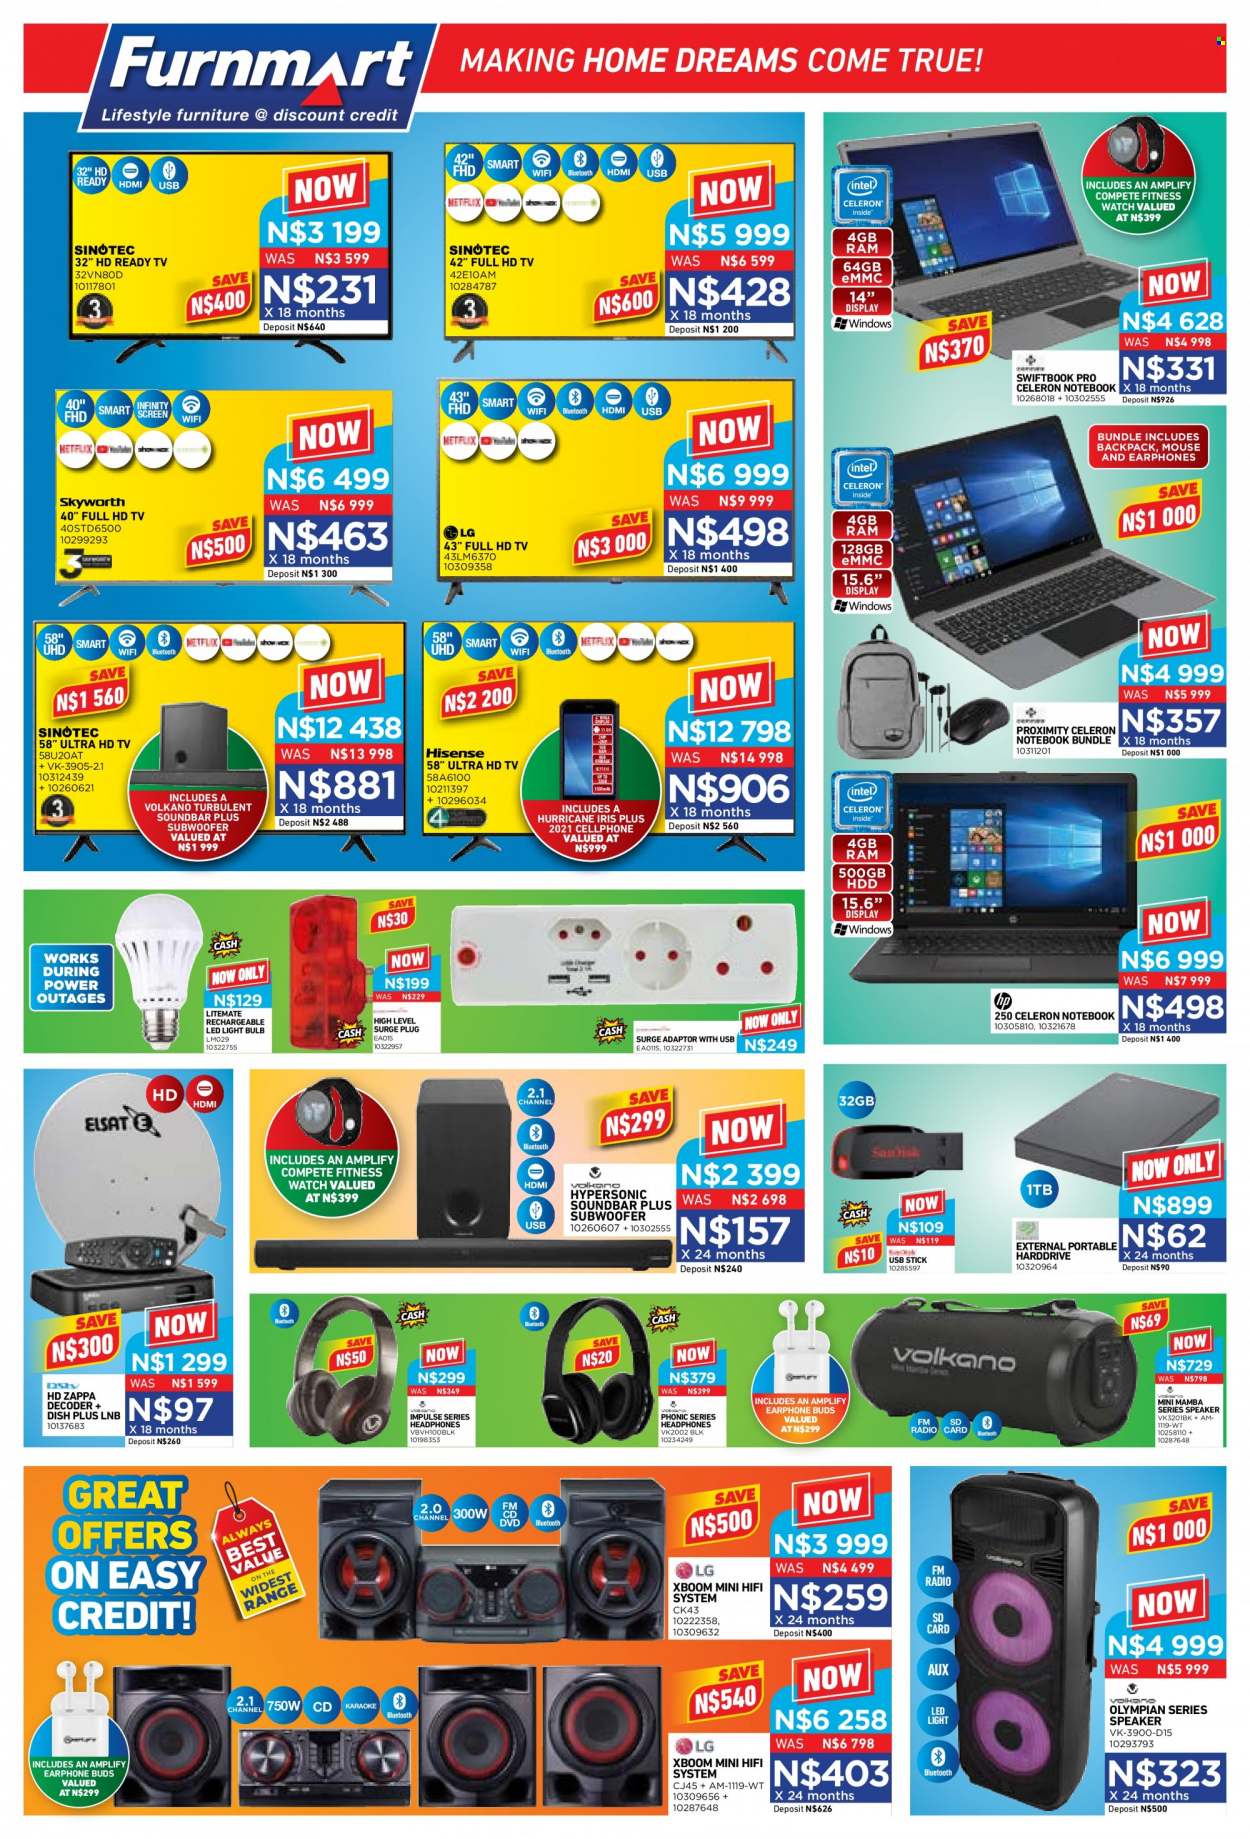 Furnmart catalogue  - 19/09/2022 - 15/10/2022 - Sales products - fitness smart watch, notebook, memory card, mouse, UHD TV, ultra hd, HDTV, Full HD TV, TV, radio, decoder, speaker, subwoofer, sound bar, headphones, Volkano, earphone. Page 6.